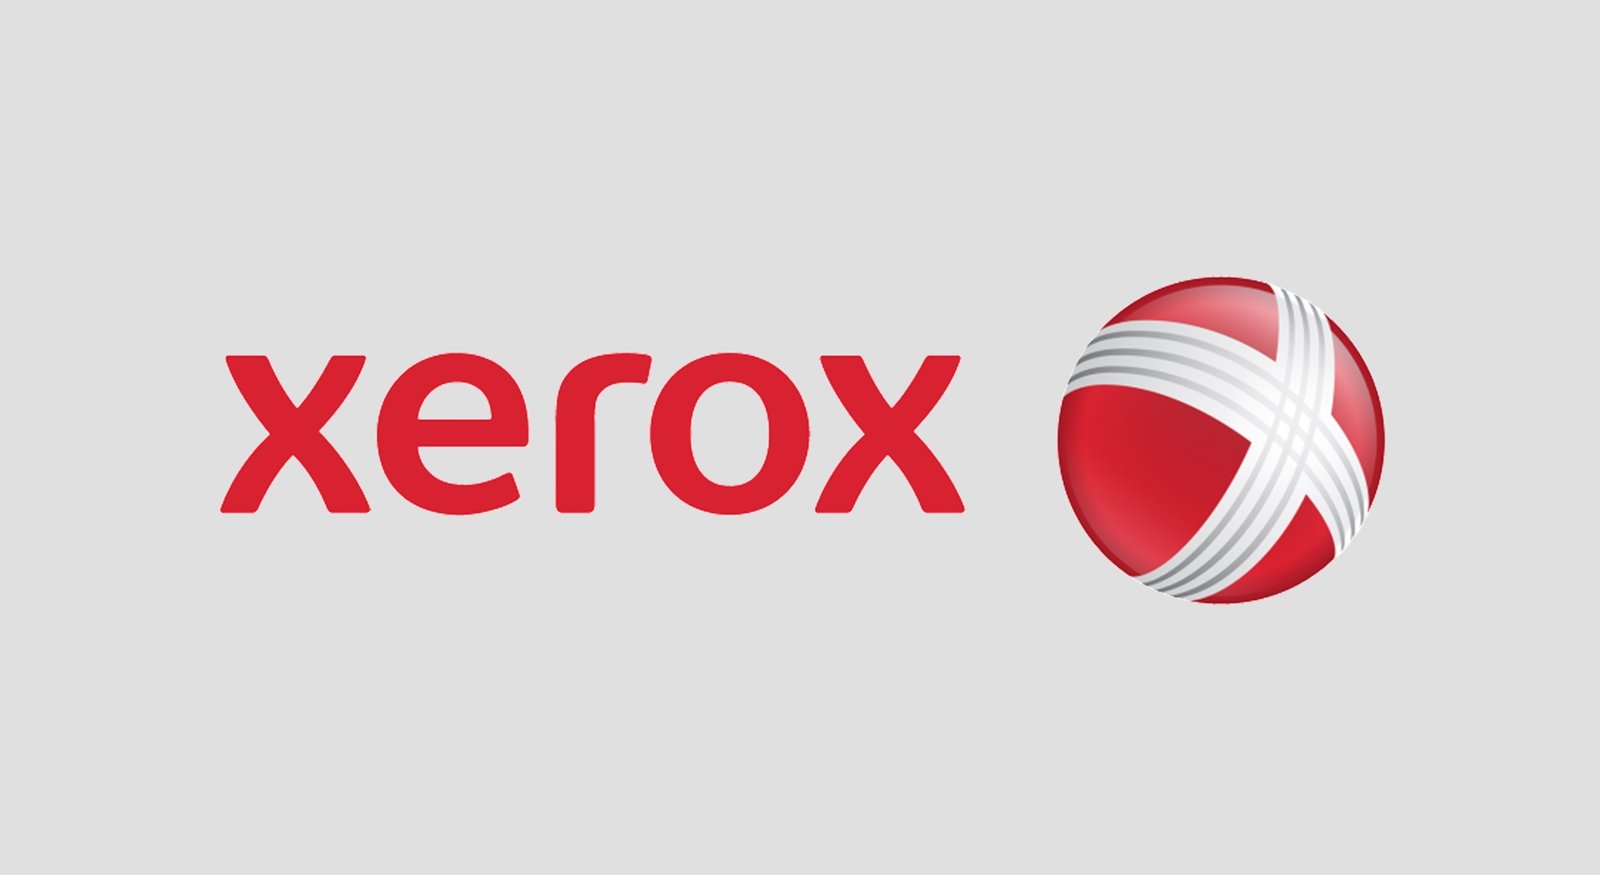 ‘a’ for apple, ‘b’ for ball, ‘c’ for cat… ‘x’ for Xerox